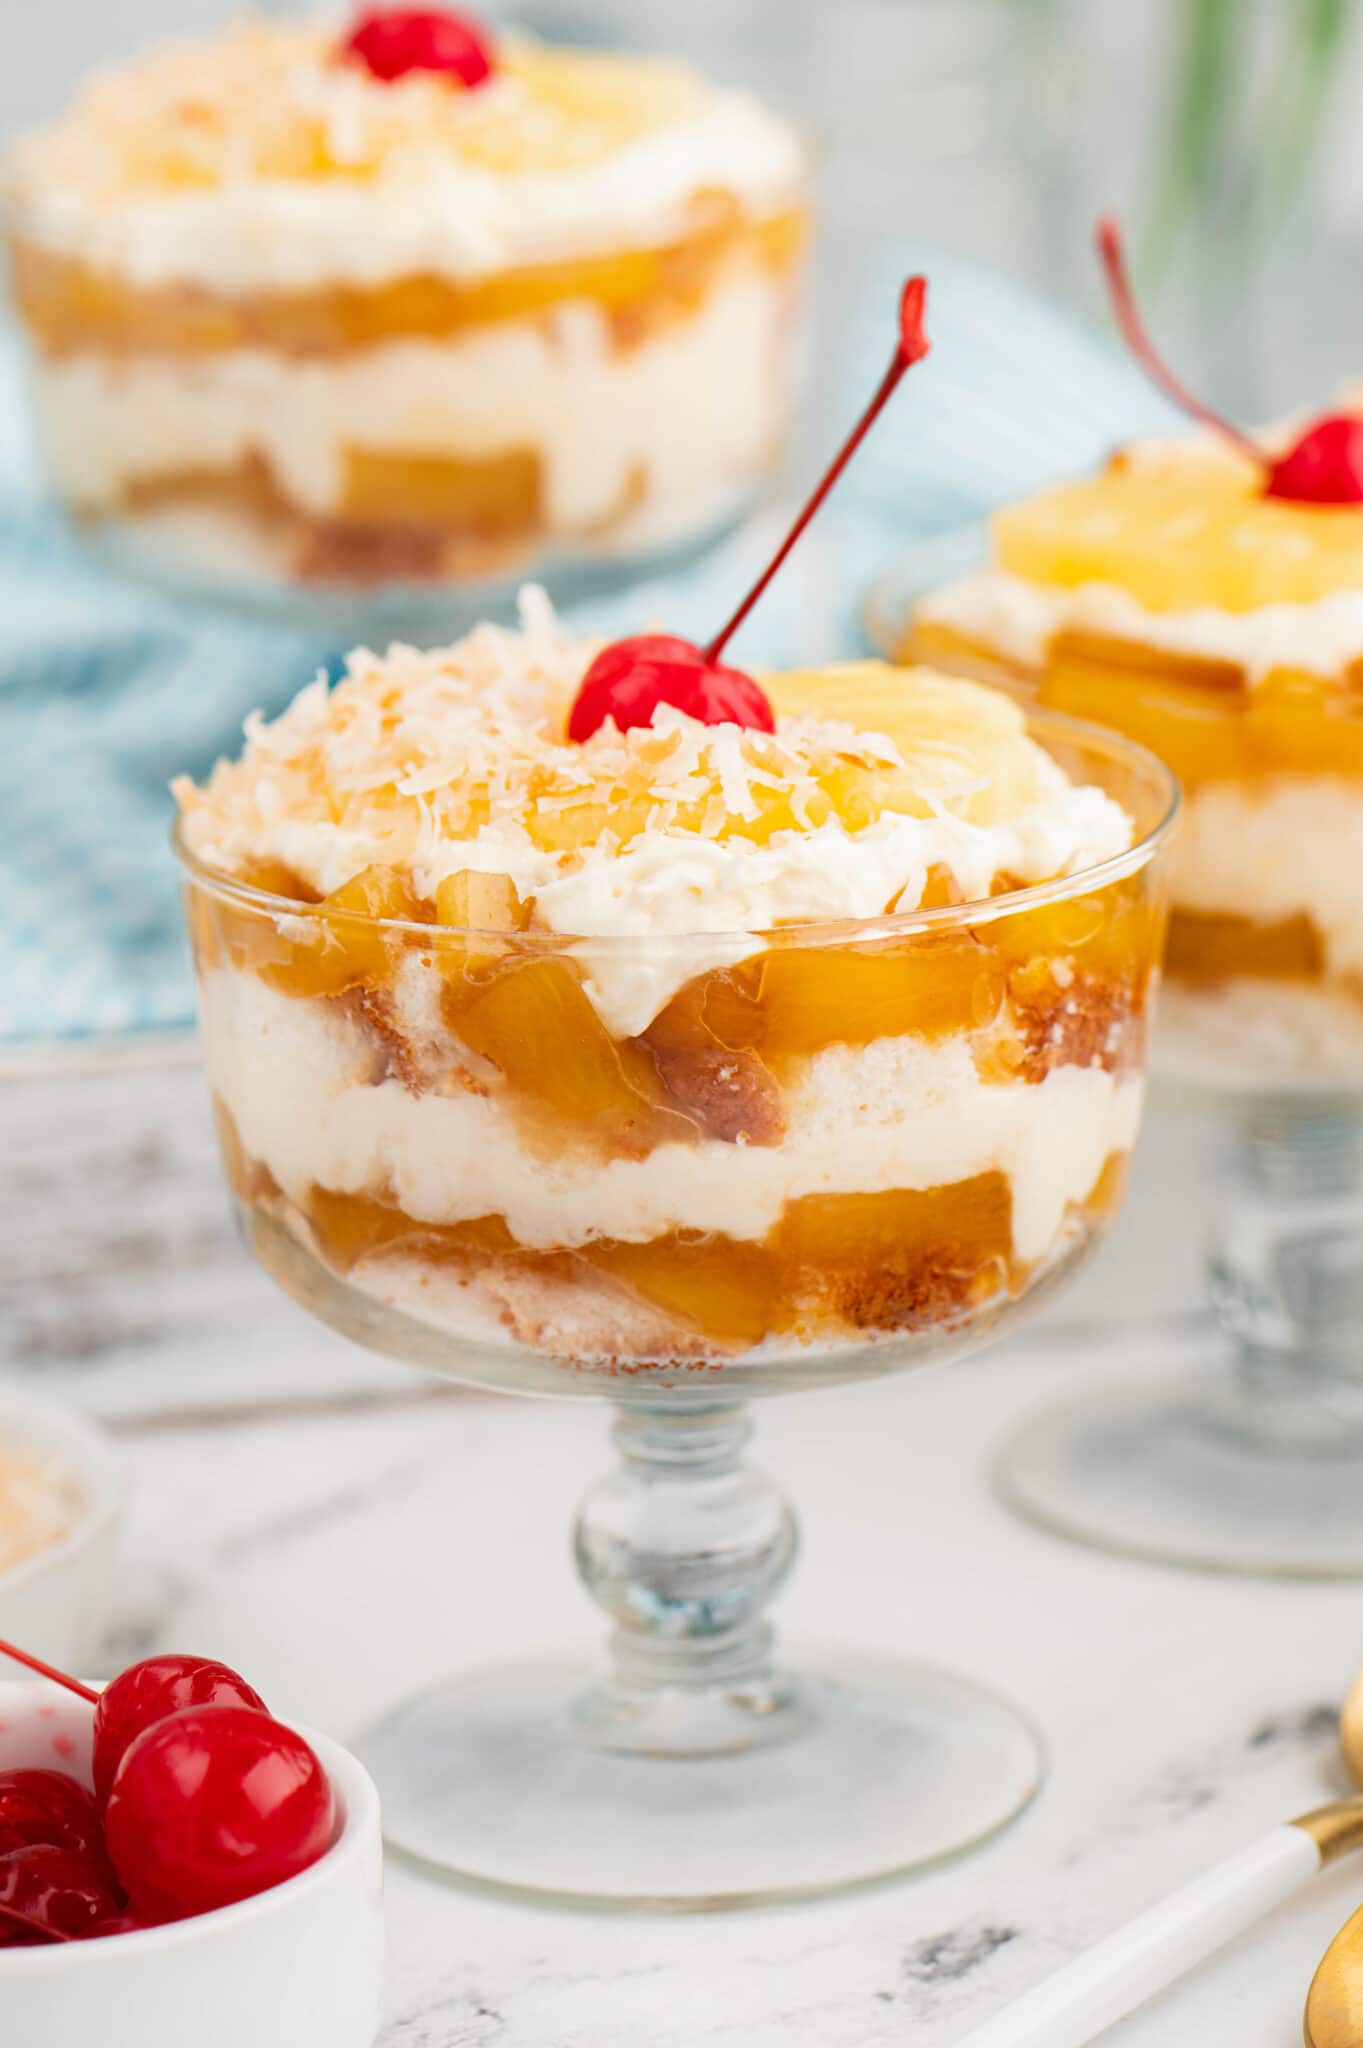 Pineapple Trifle with a cherry on top.